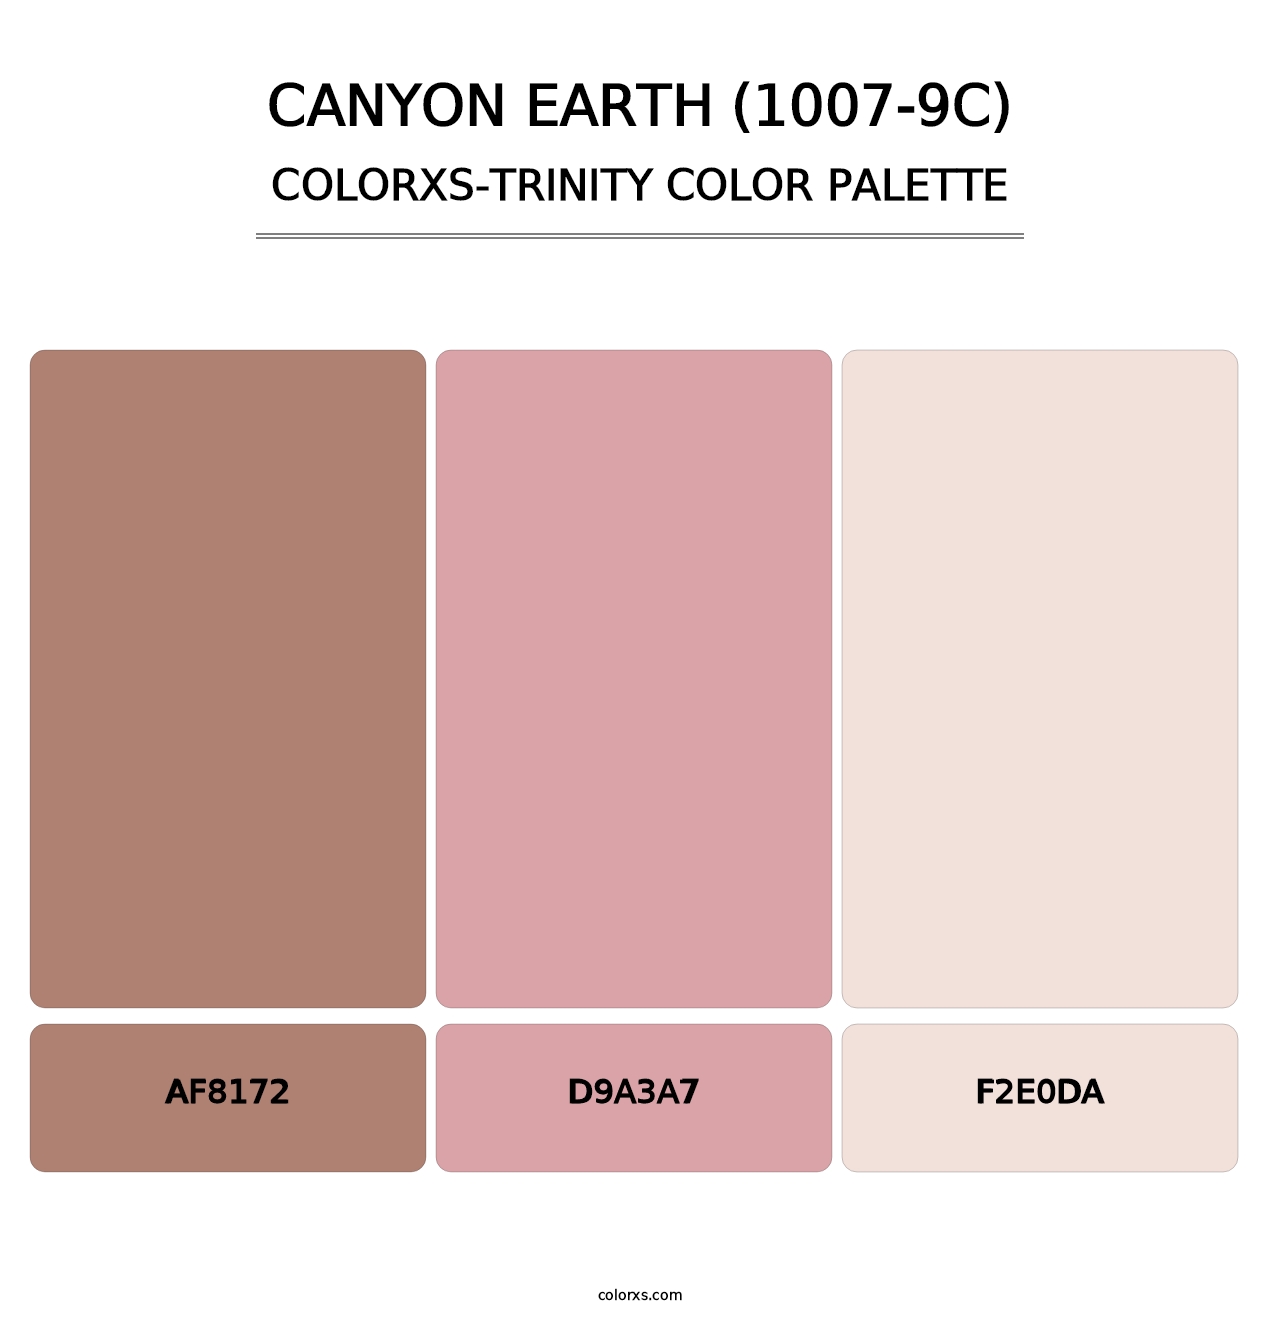 Canyon Earth (1007-9C) - Colorxs Trinity Palette